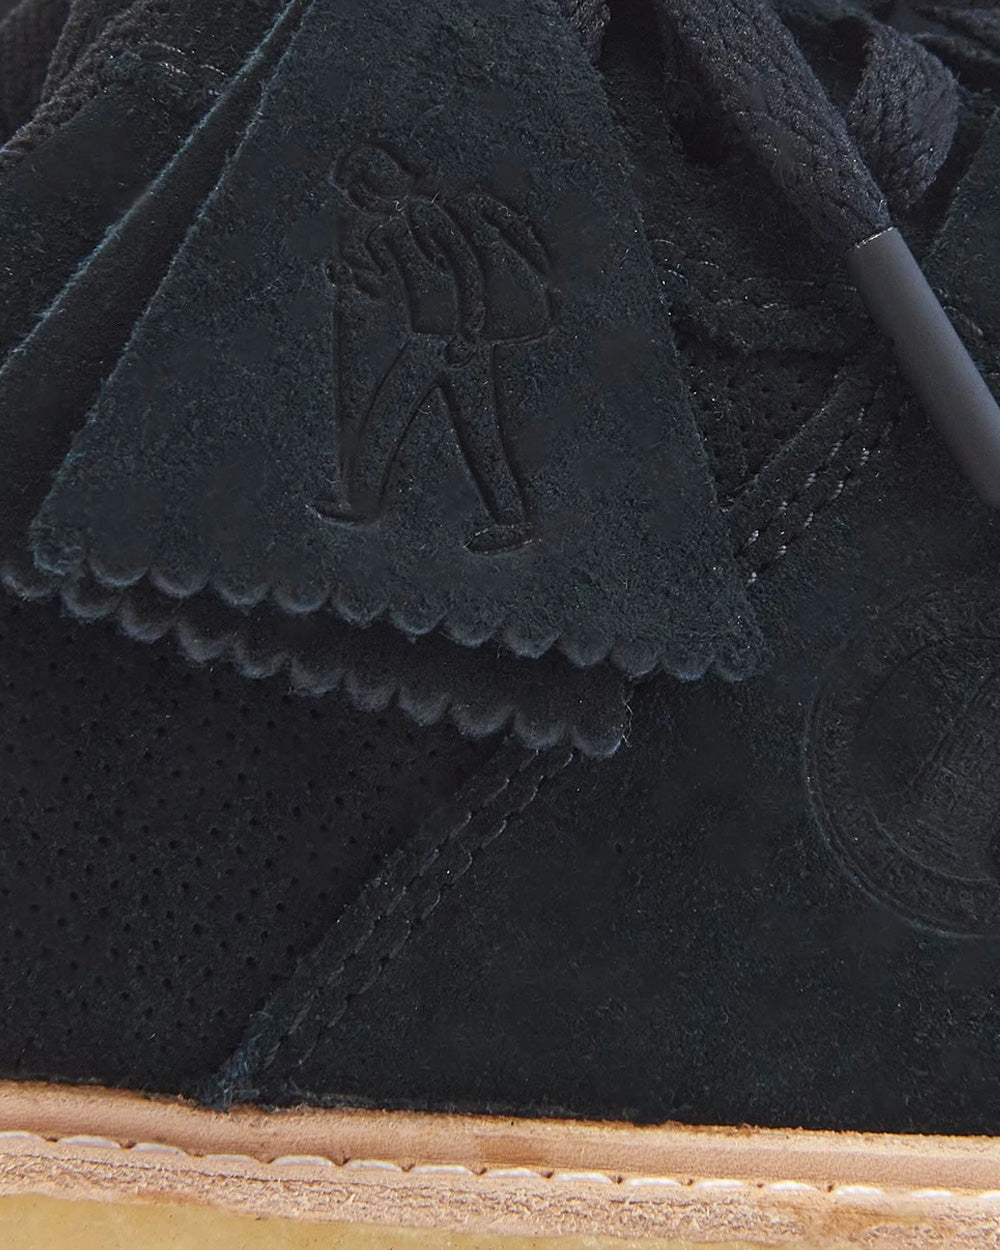 Clarks x Kith - Sandford Suede Black Low Top Sneakers